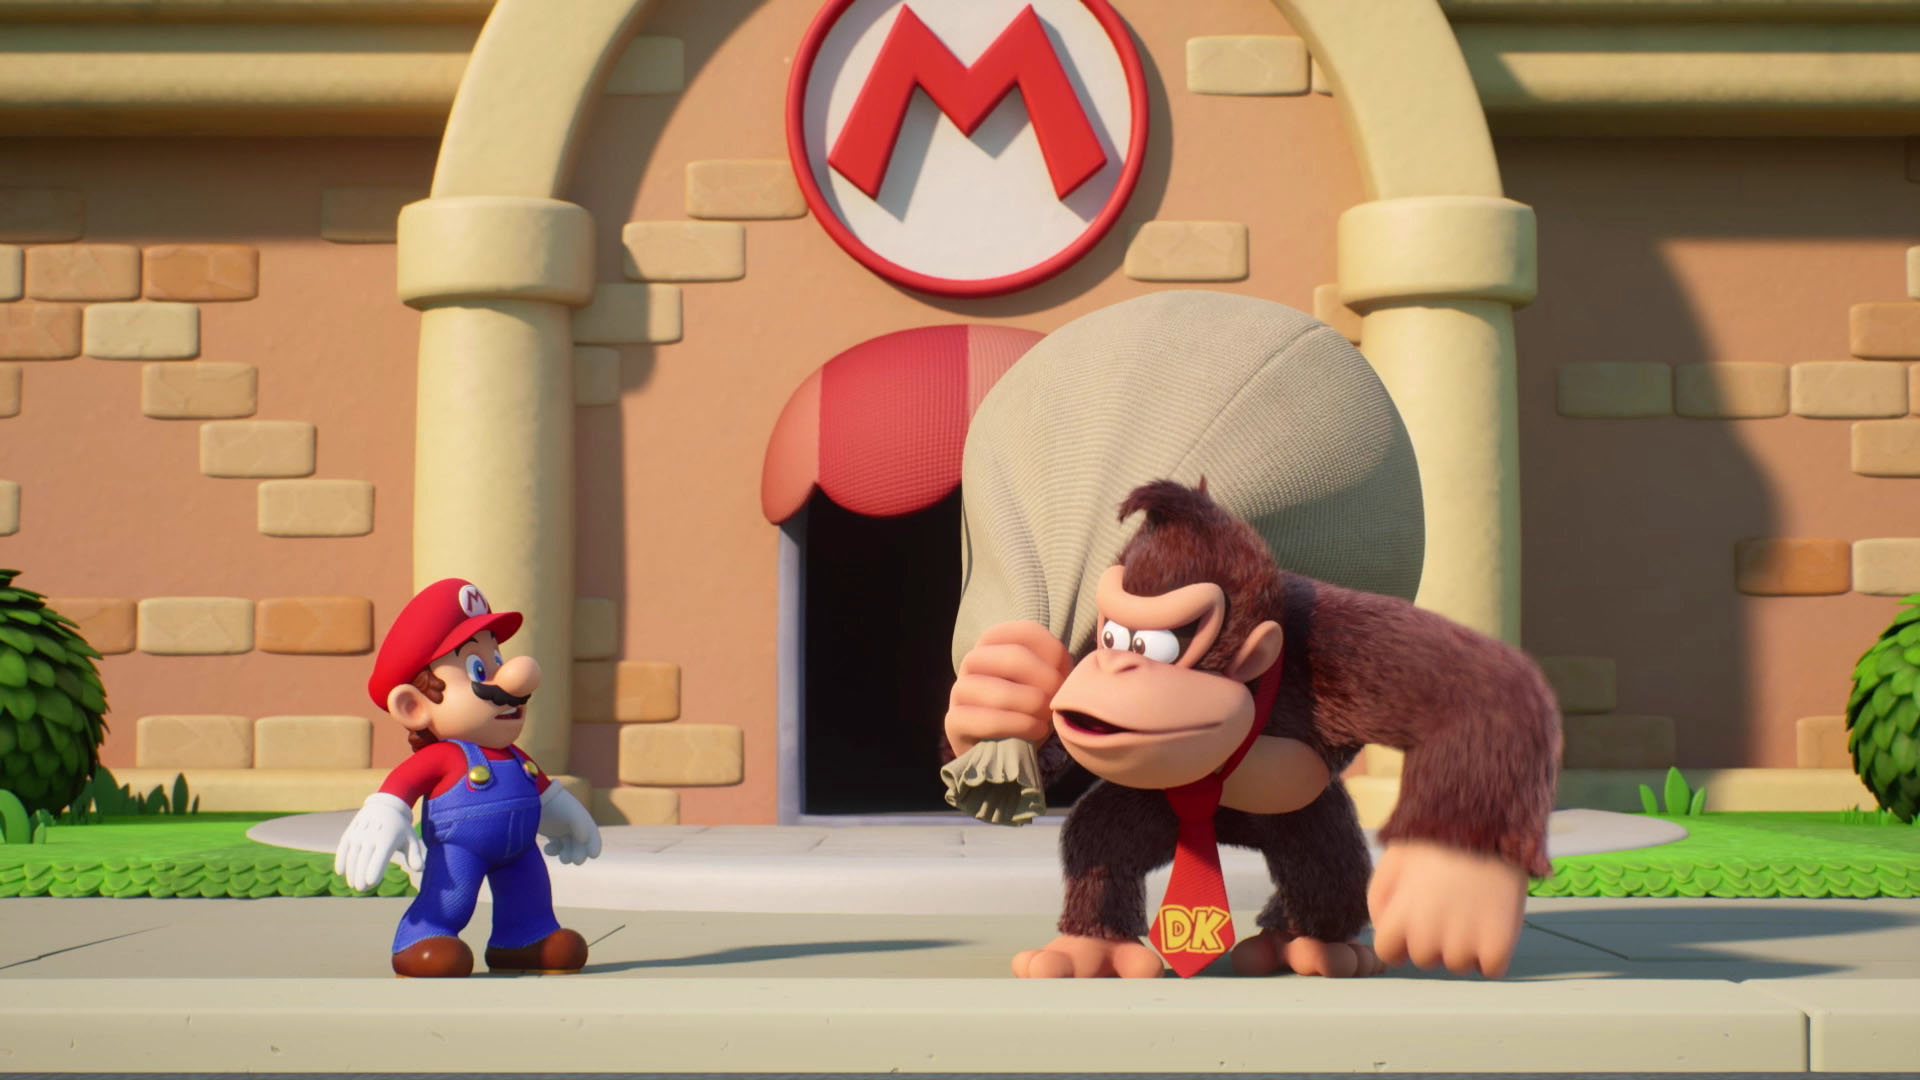 Analysis of Mario vs. Donkey Kong, a remake made with love and enthusiasm -  Softonic